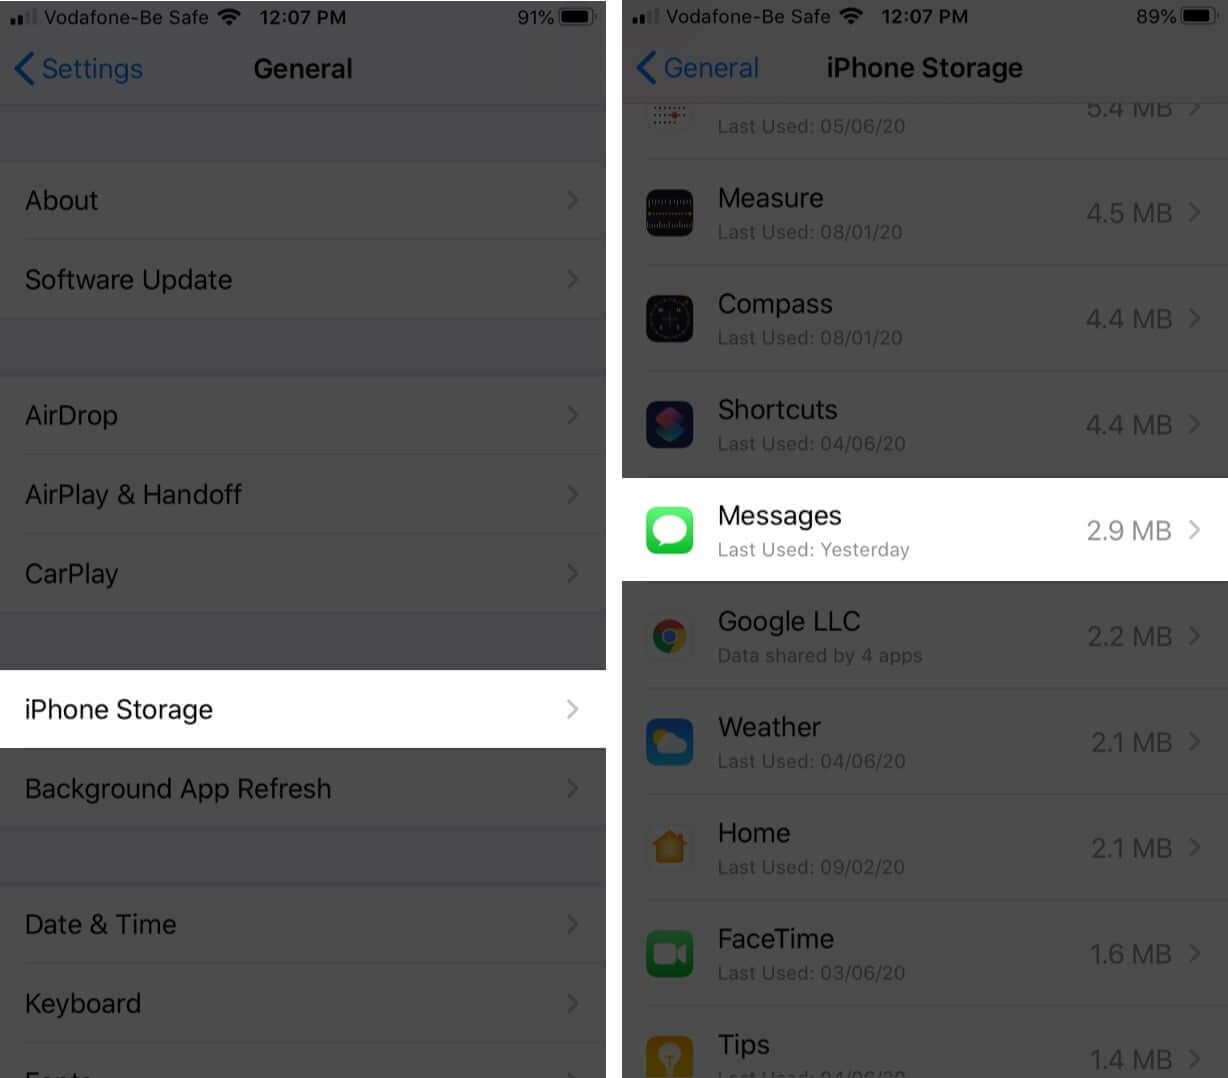 Tap on iPhone Storage and then Tap Messages on iPhone